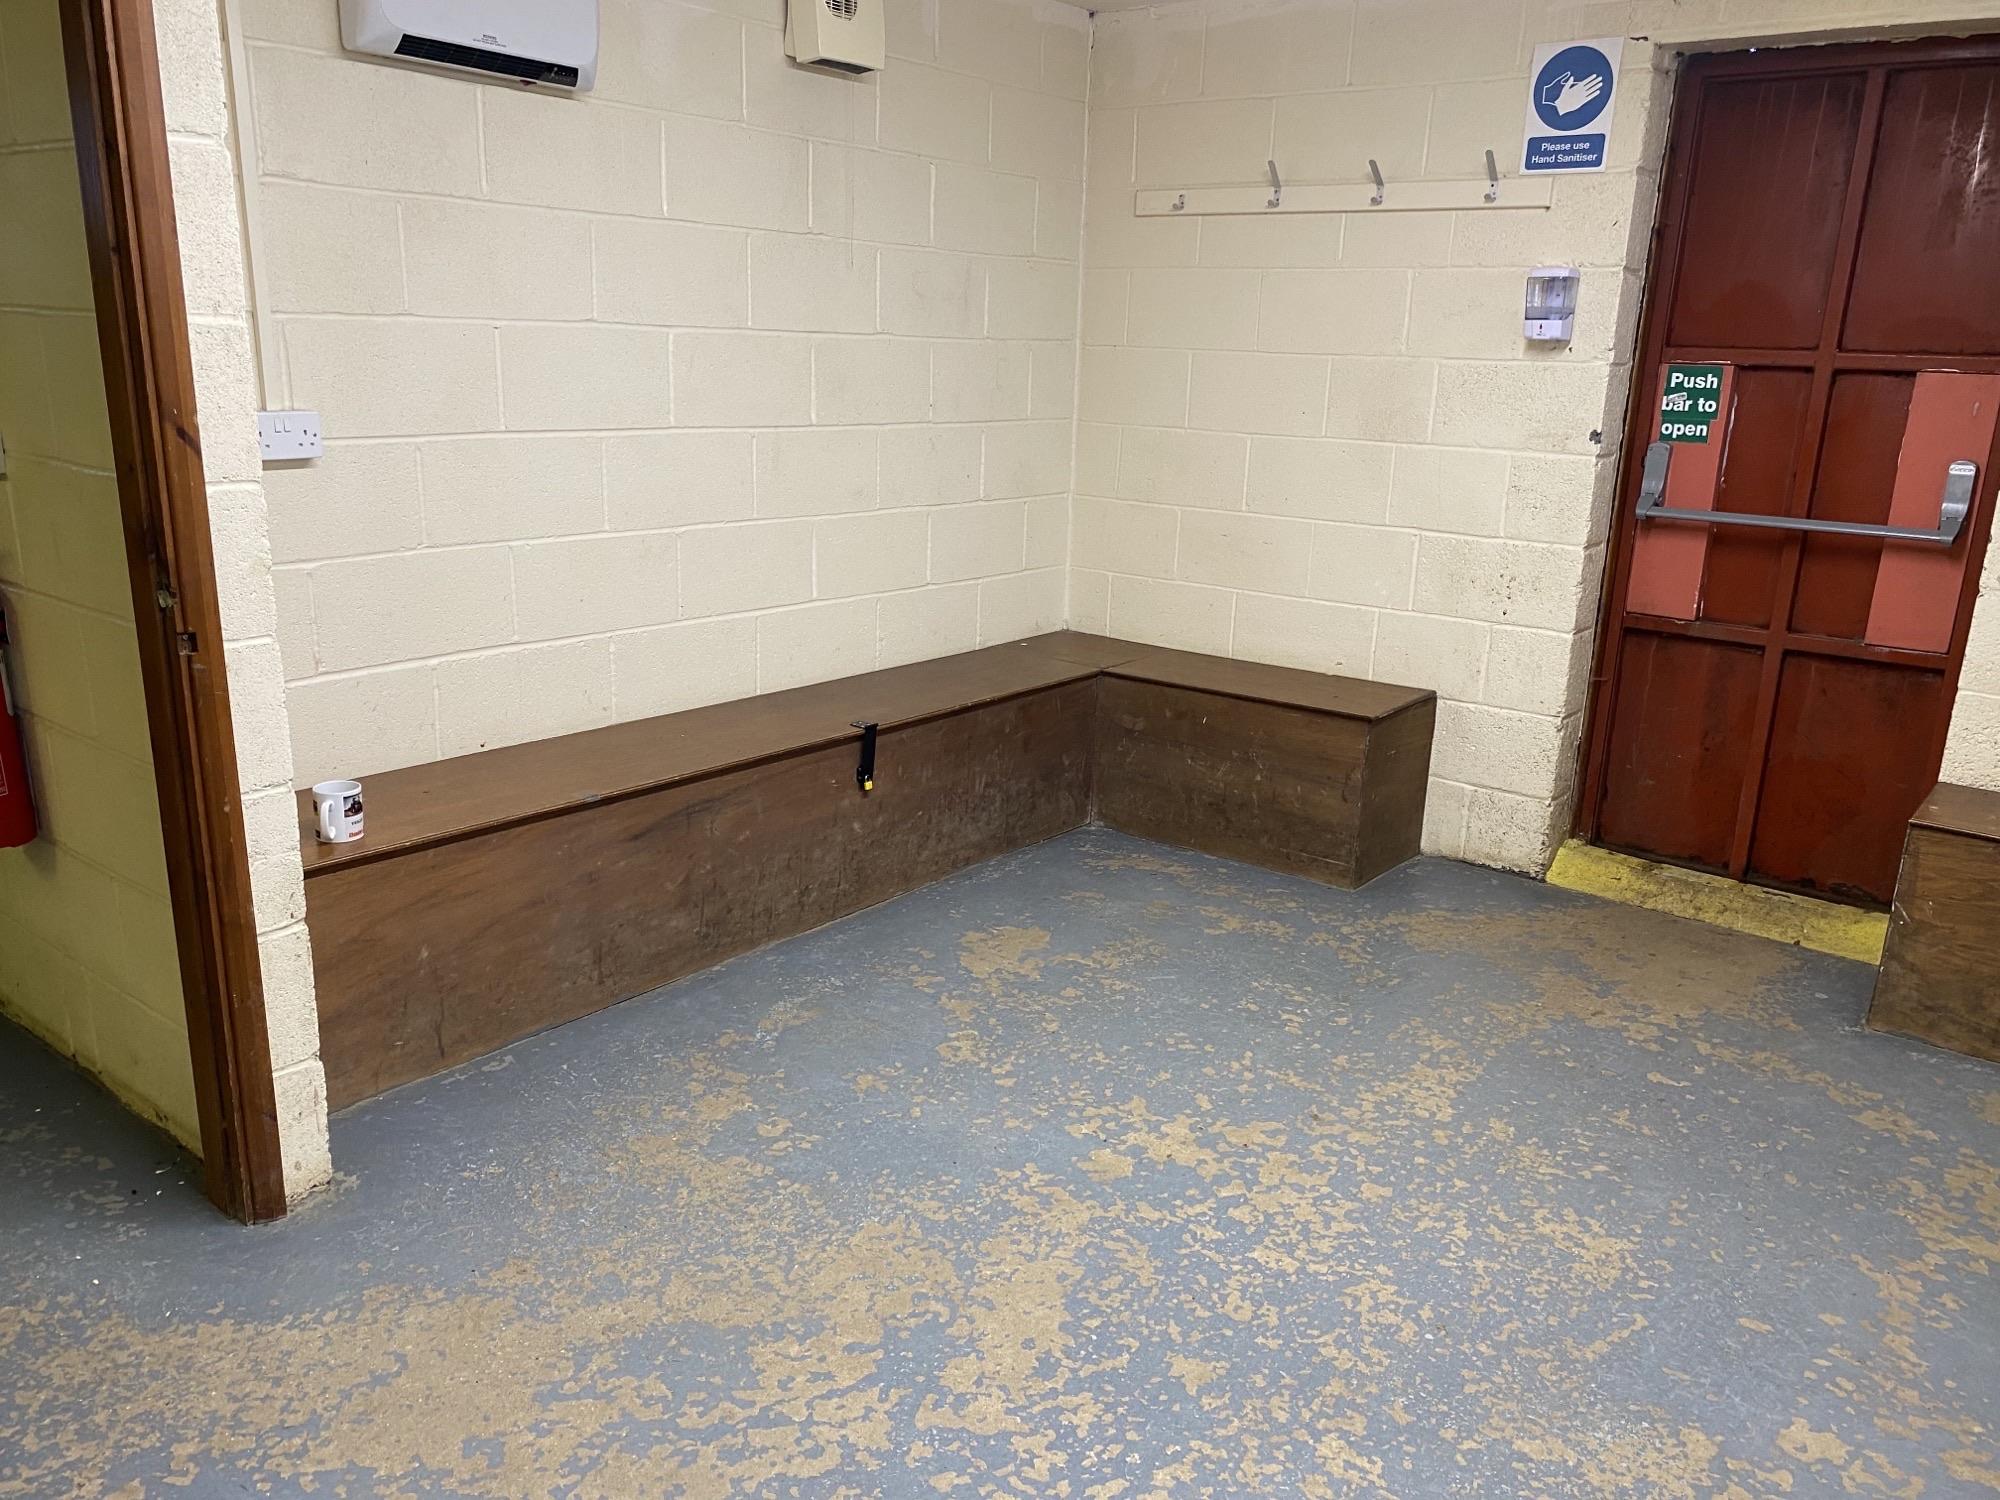 Changing rooms